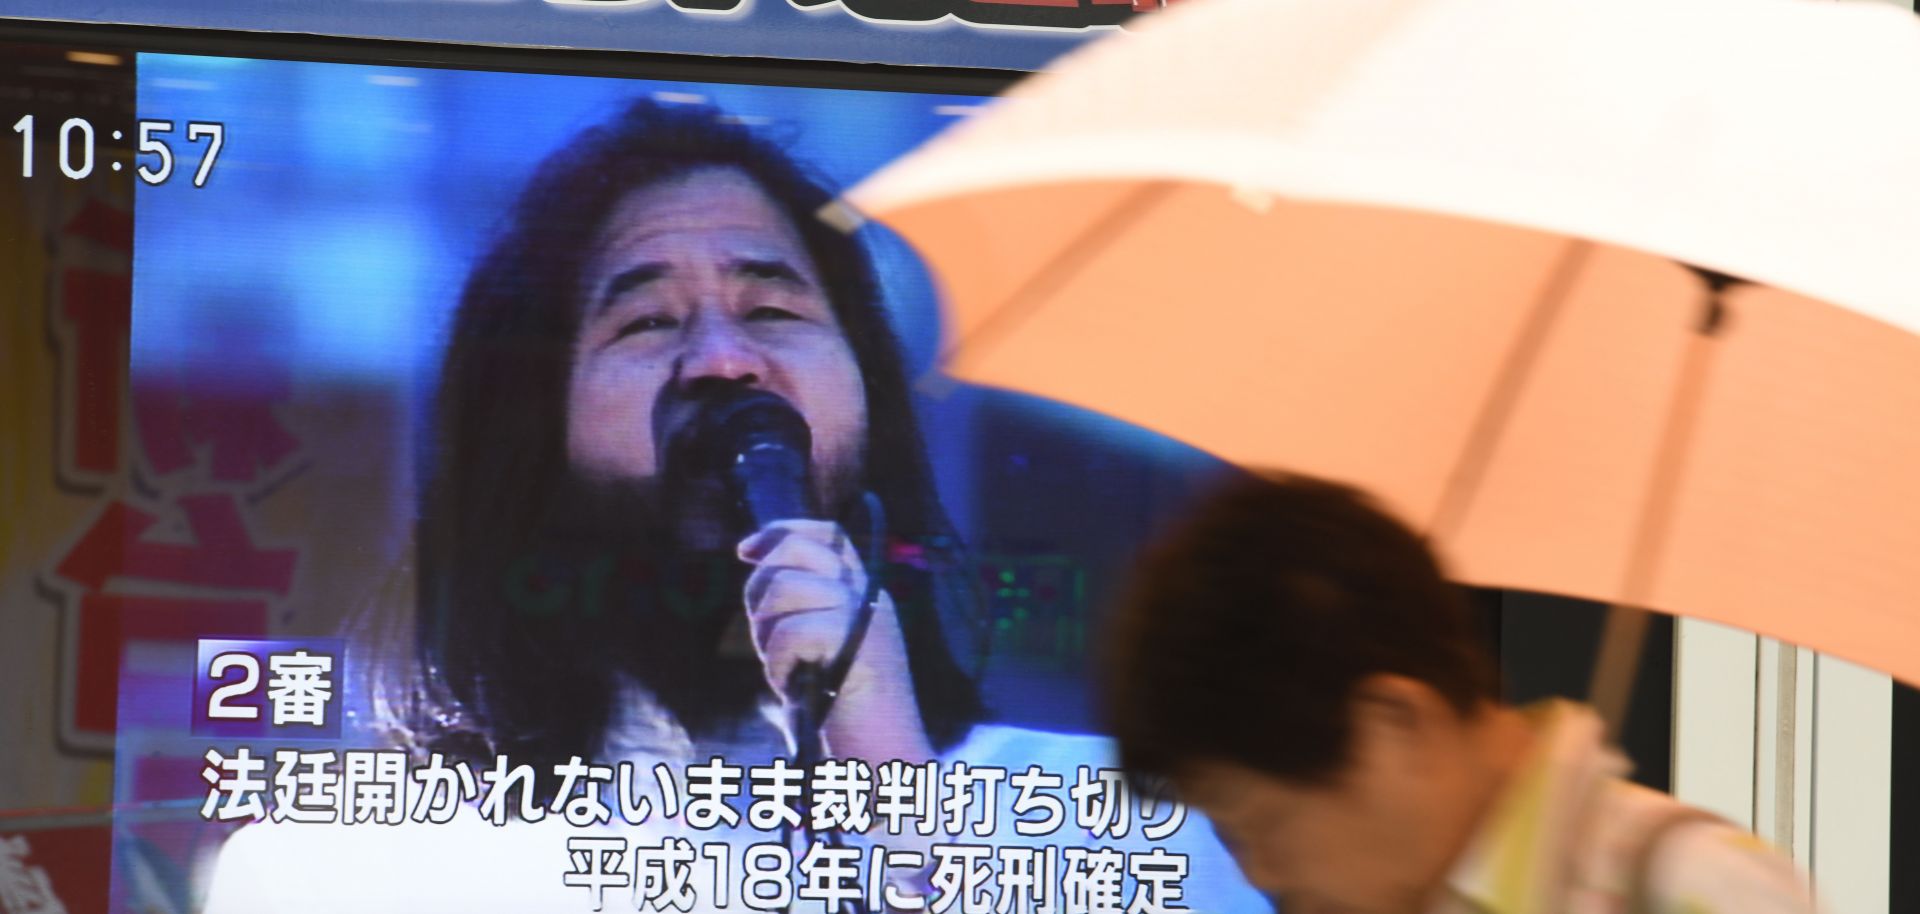 A television screen in Tokyo announces the execution of Shoko Asahara, leader of the Aum Shinrikyo cult, which conducted a deadly attack on the Tokyo subway in 1995.